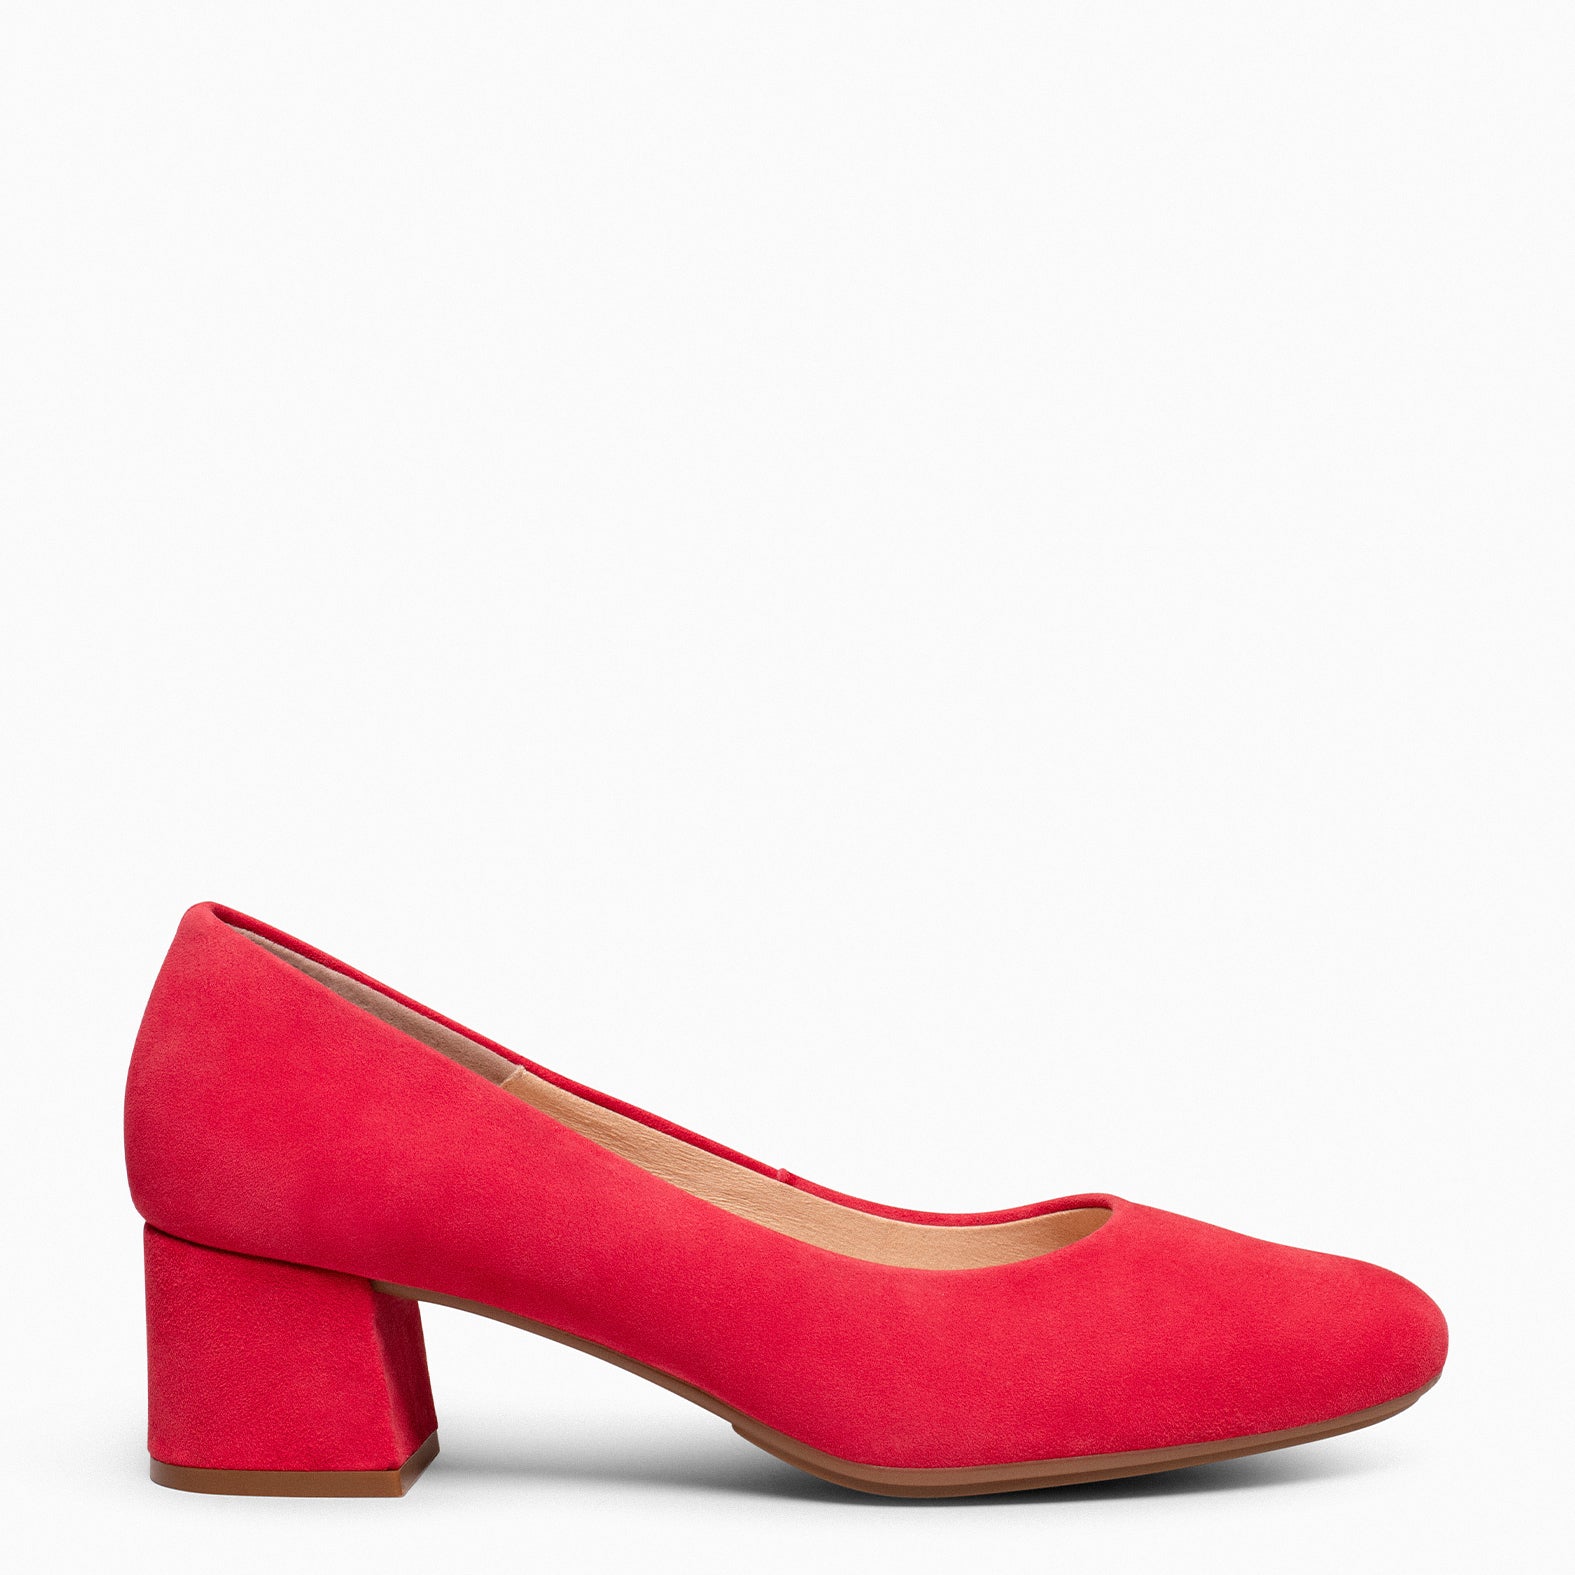 URBAN ROUND – RED suede leather low heels